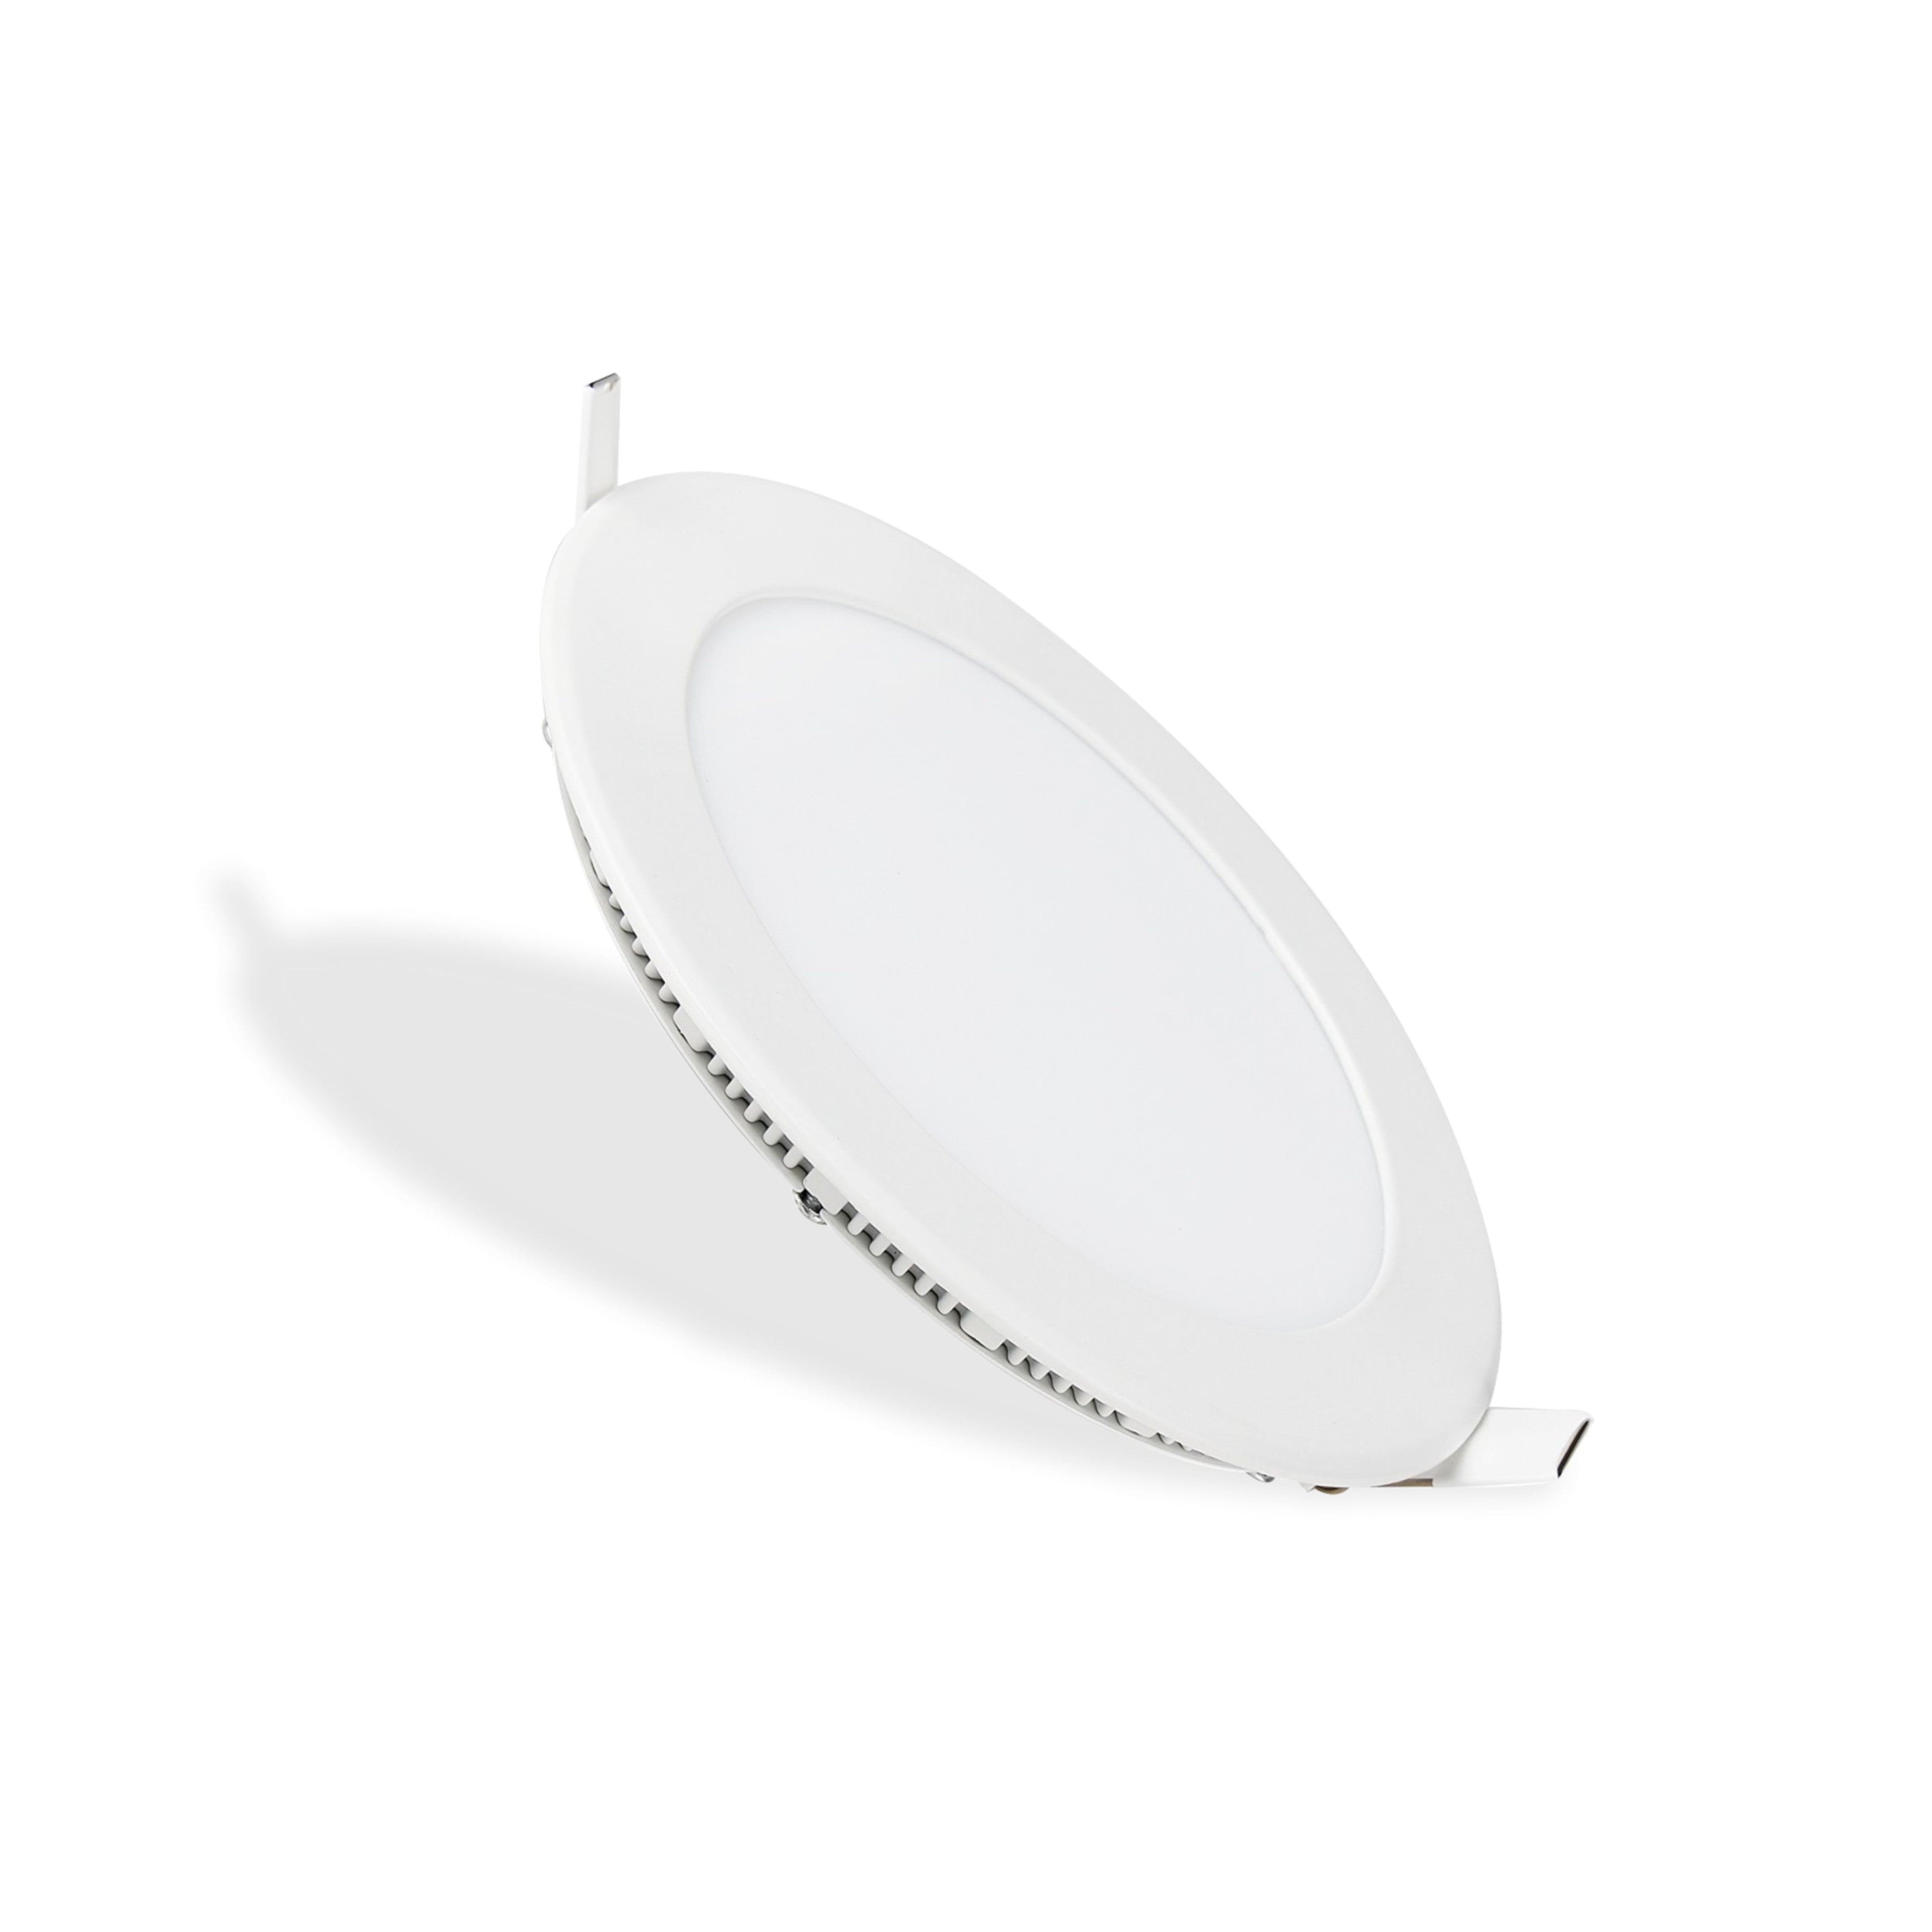 18W Recessed Round LED Downlight Mini Panel 220mm Diameter, 205mm Hole Size, CE Driver, 4000K, 20000 Hours Long Life